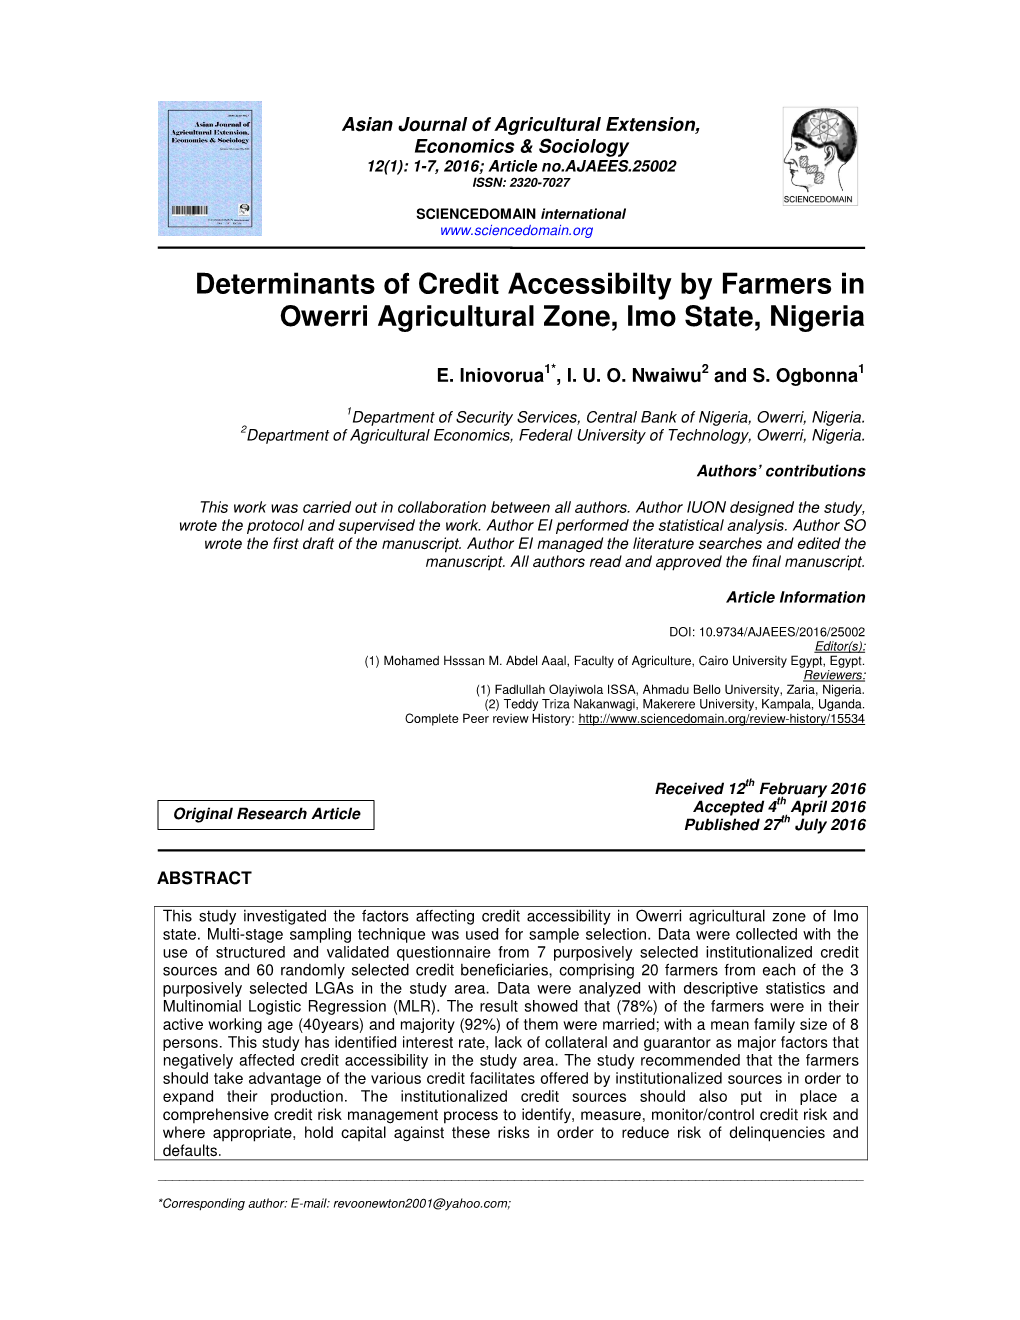 Determinants of Credit Accessibilty by Farmers in Owerri Agricultural Zone, Imo State, Nigeria